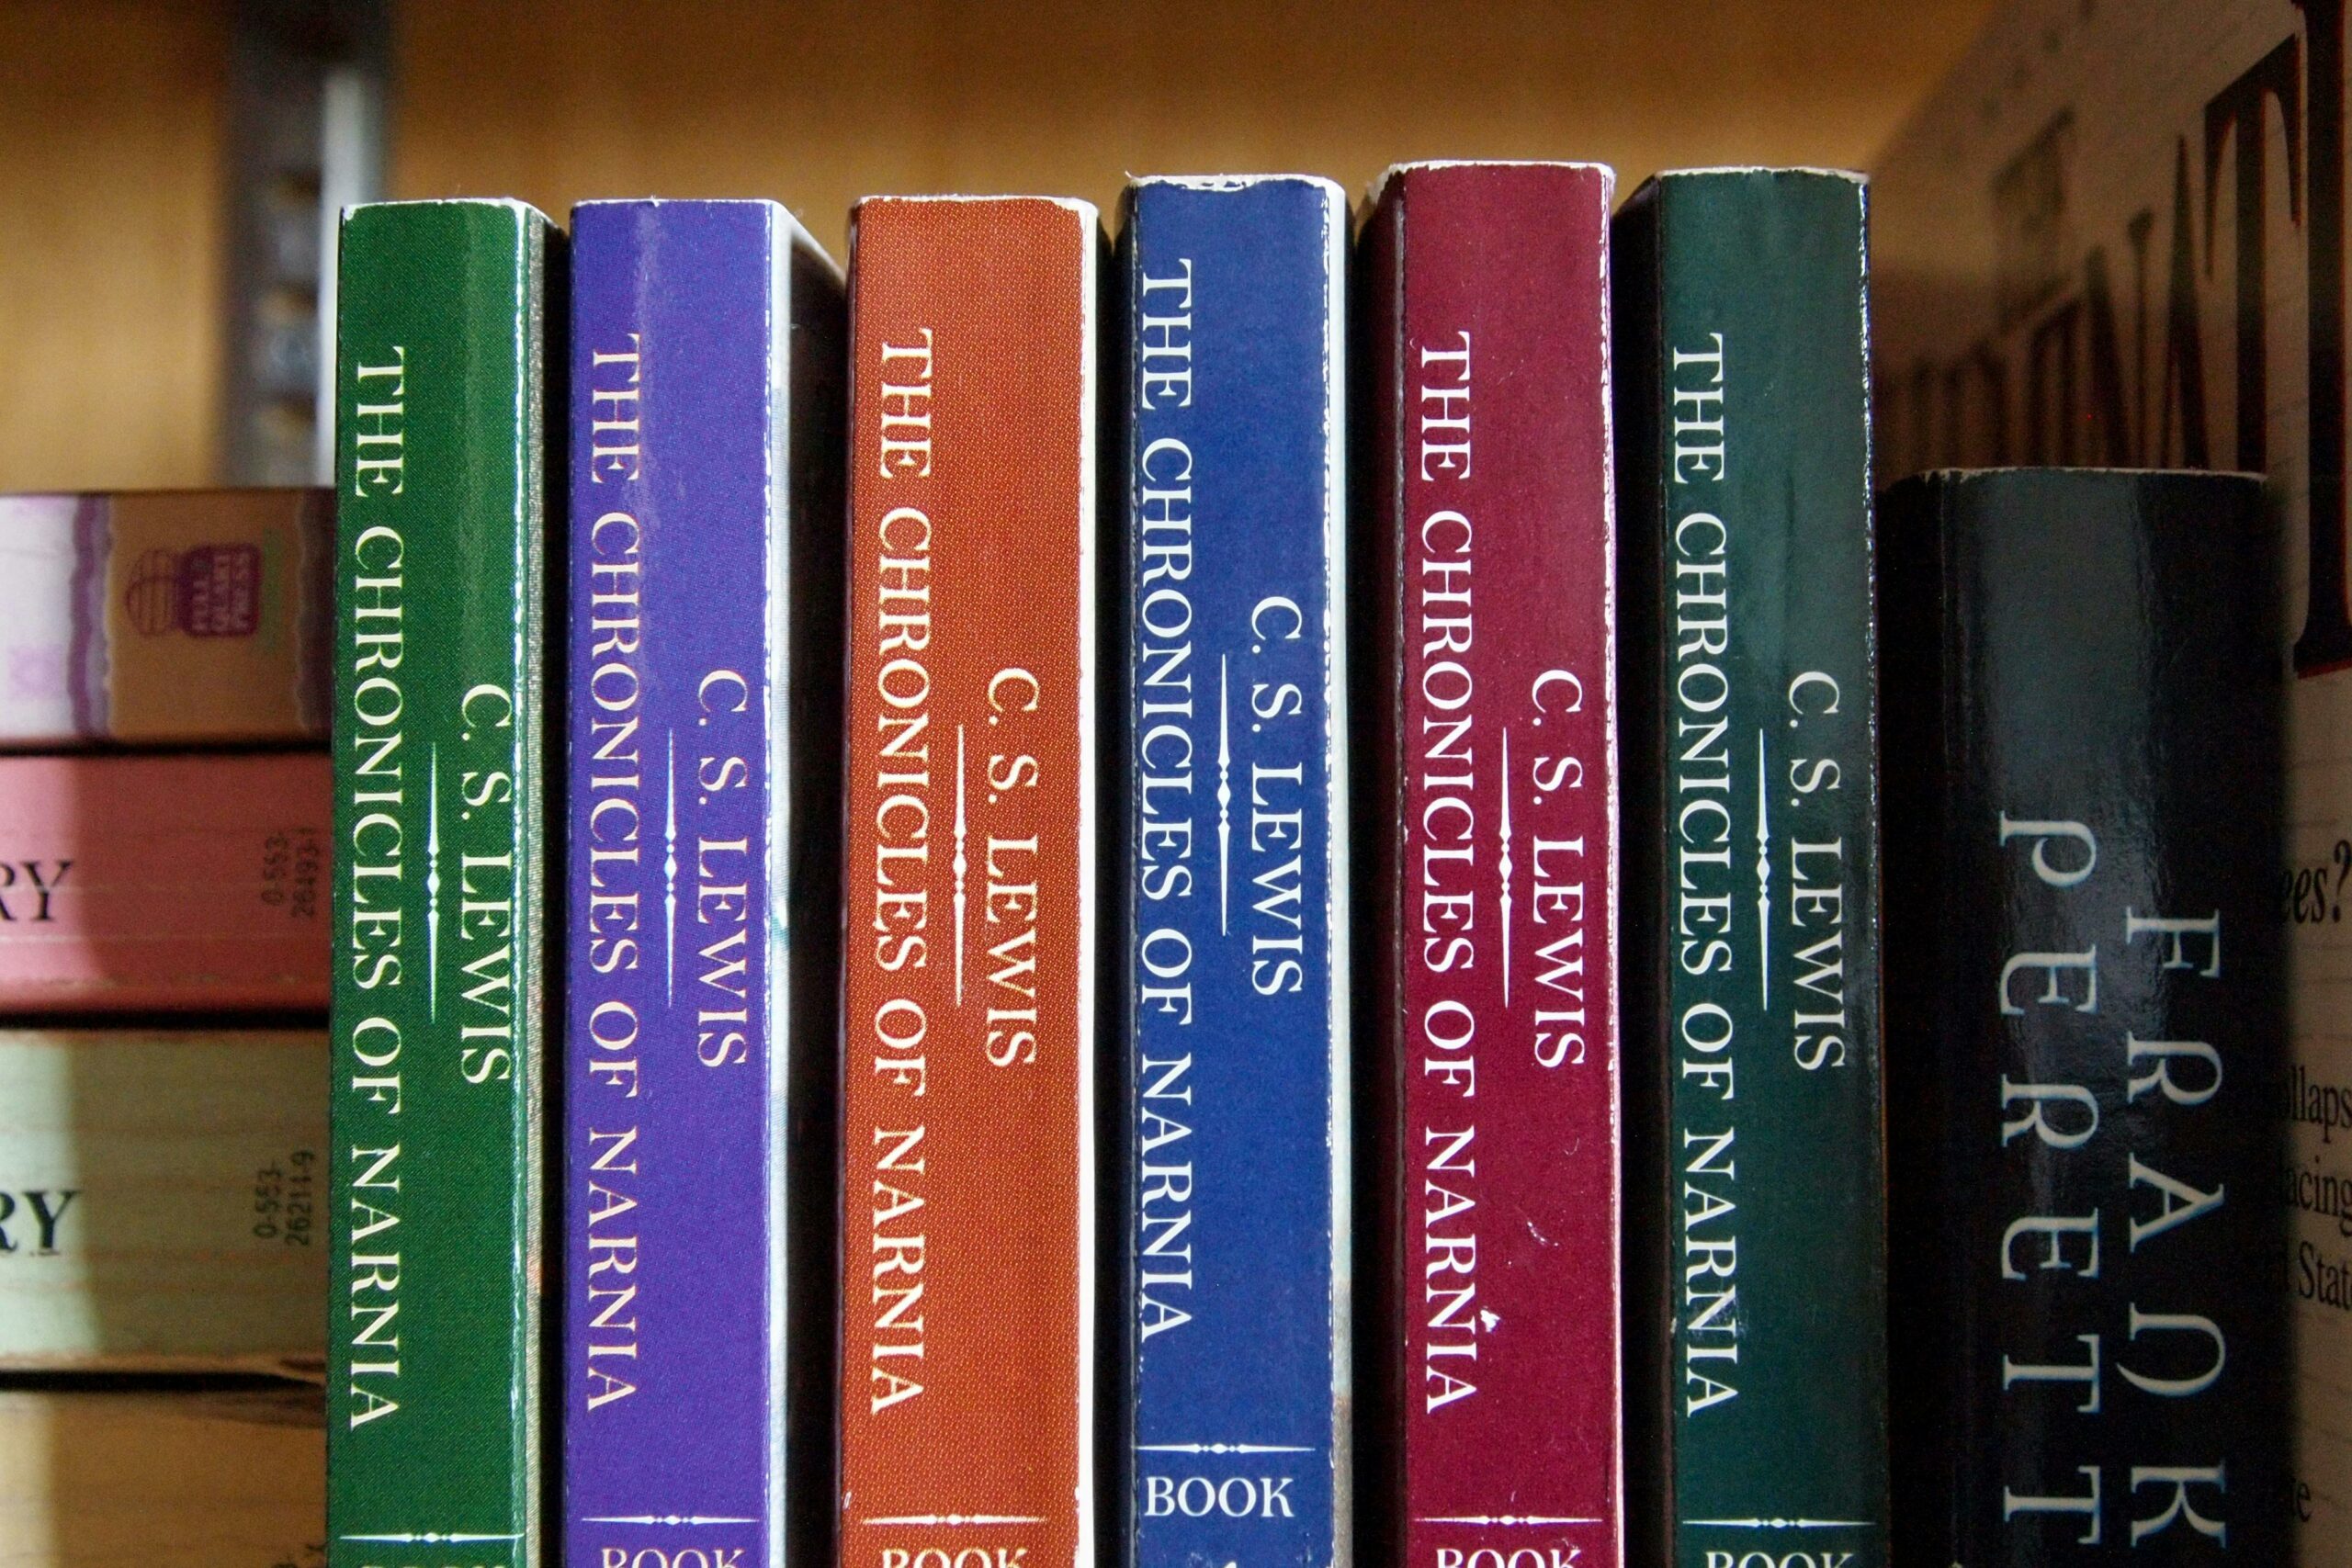 Photograph of C.S. Lewis' Narnia books on a shelf